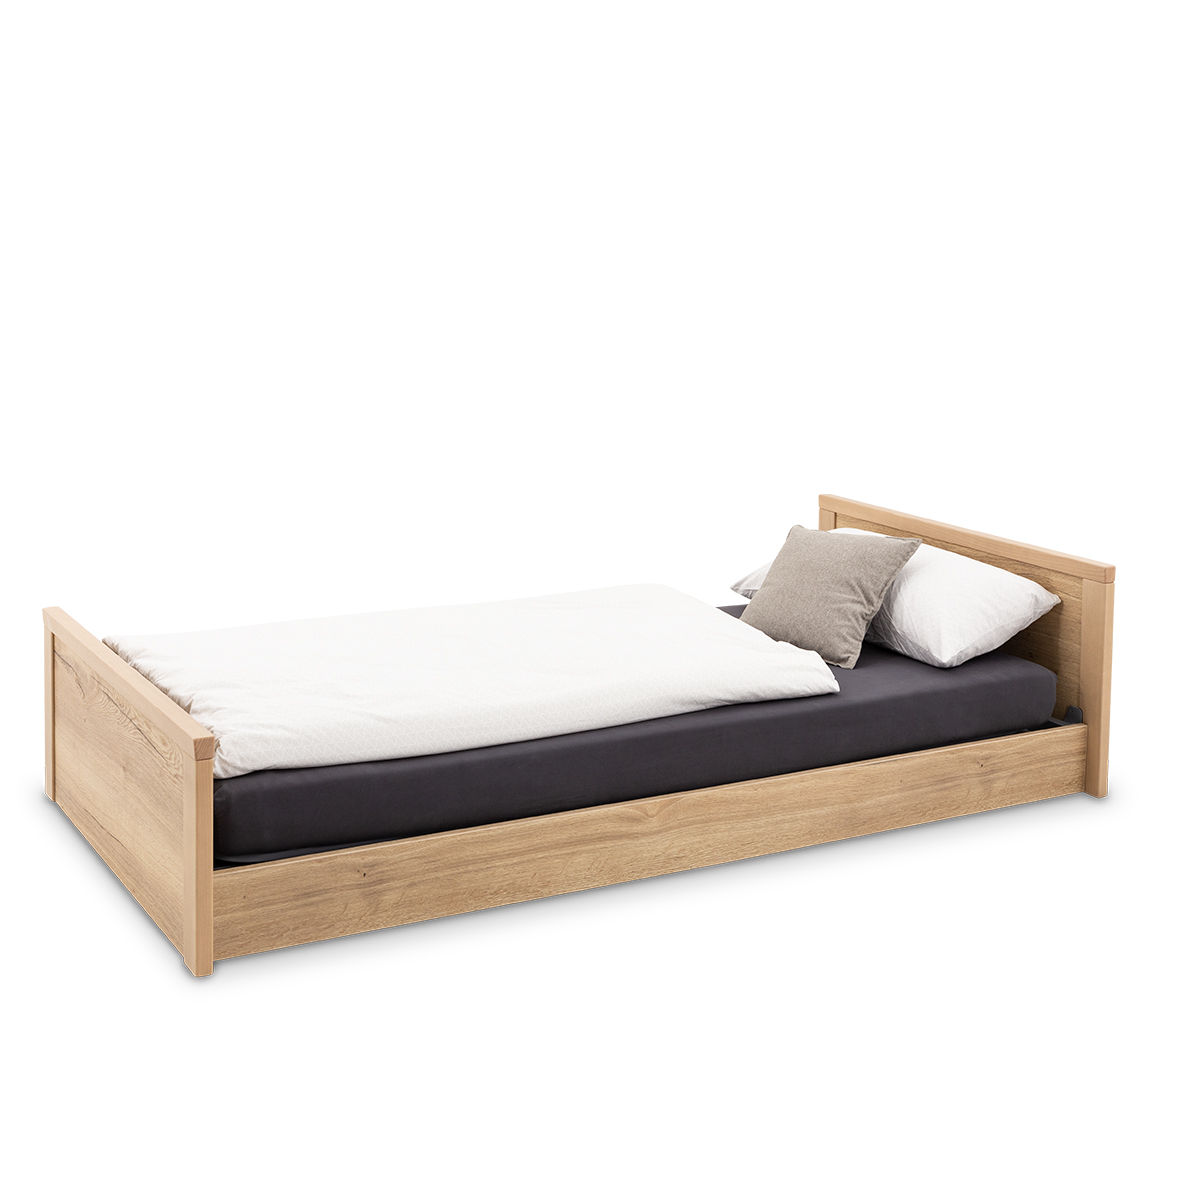 Ultra Low Care Bed "IMPULSE Edt. 500"